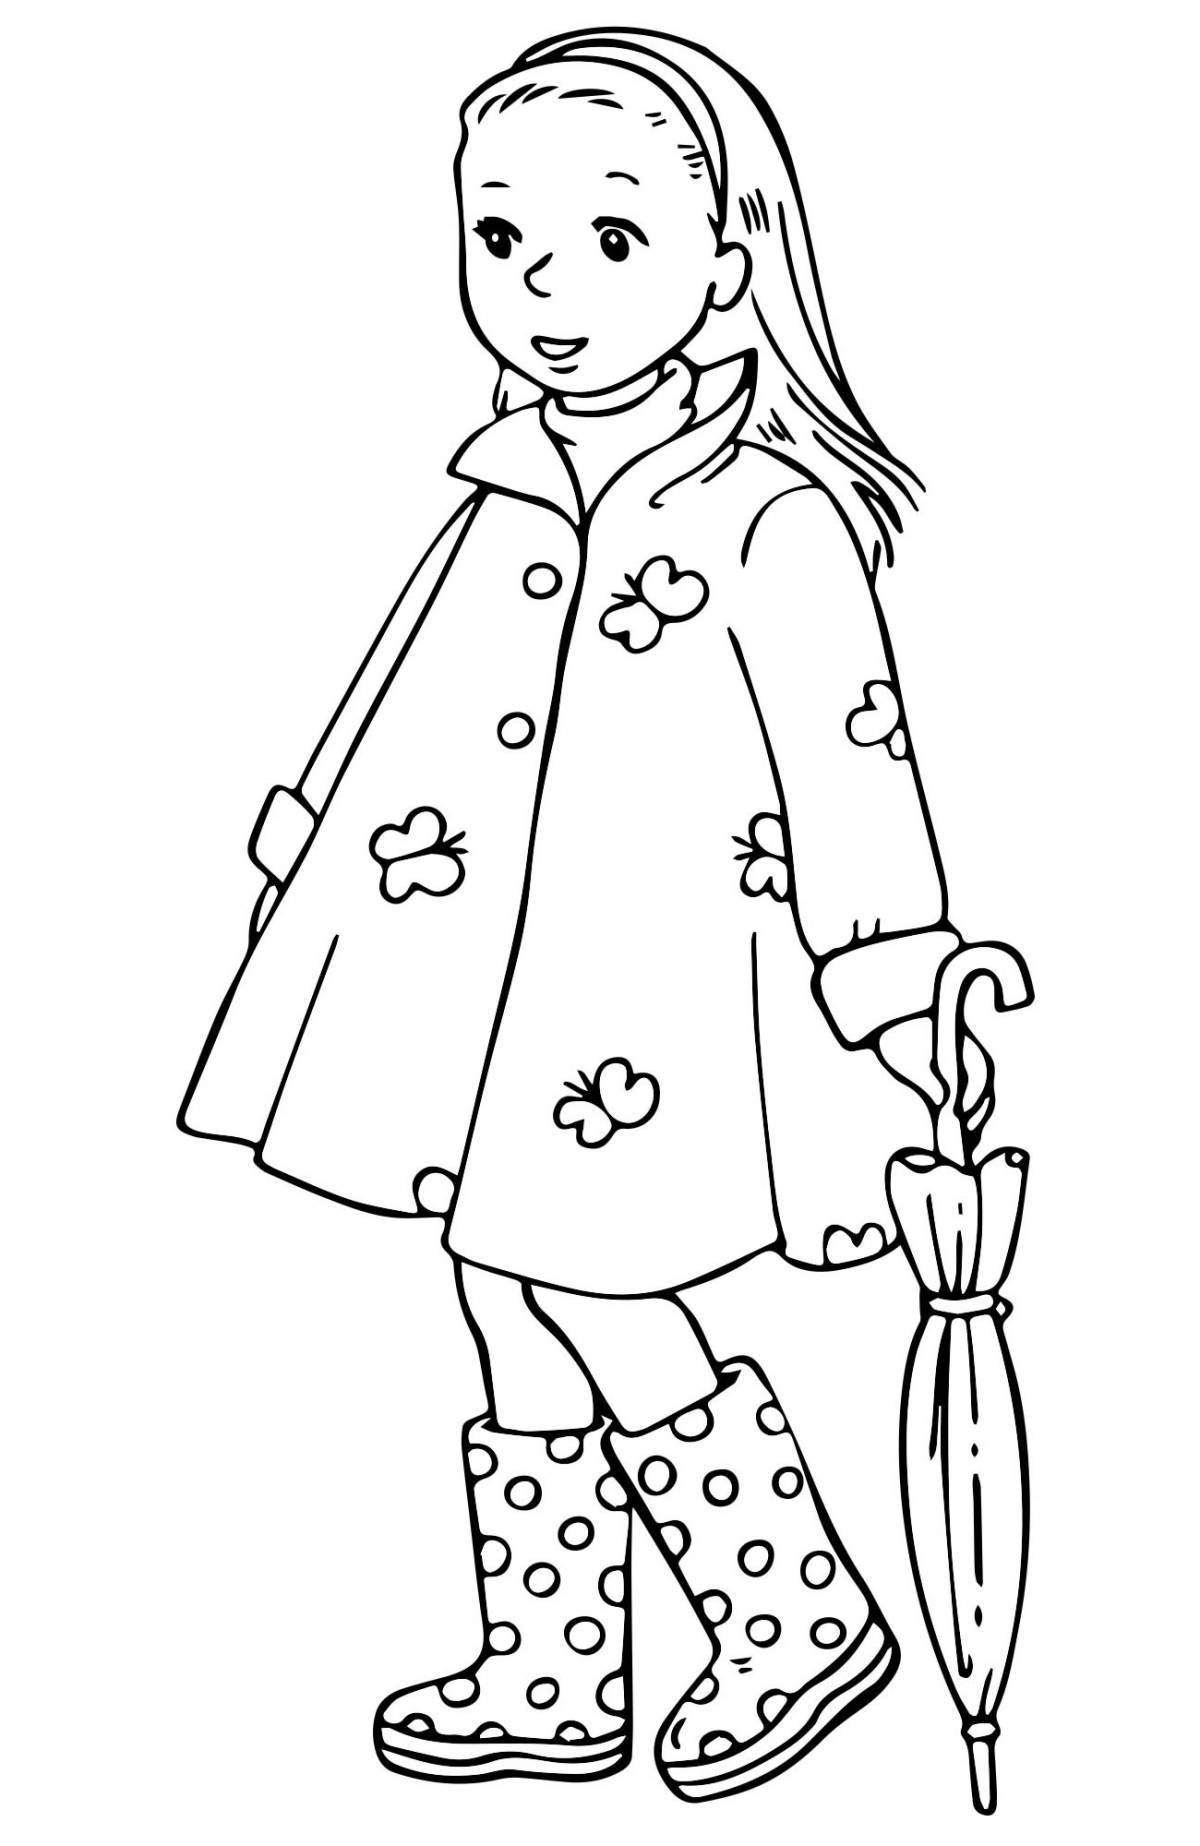 Glitter coat coloring page